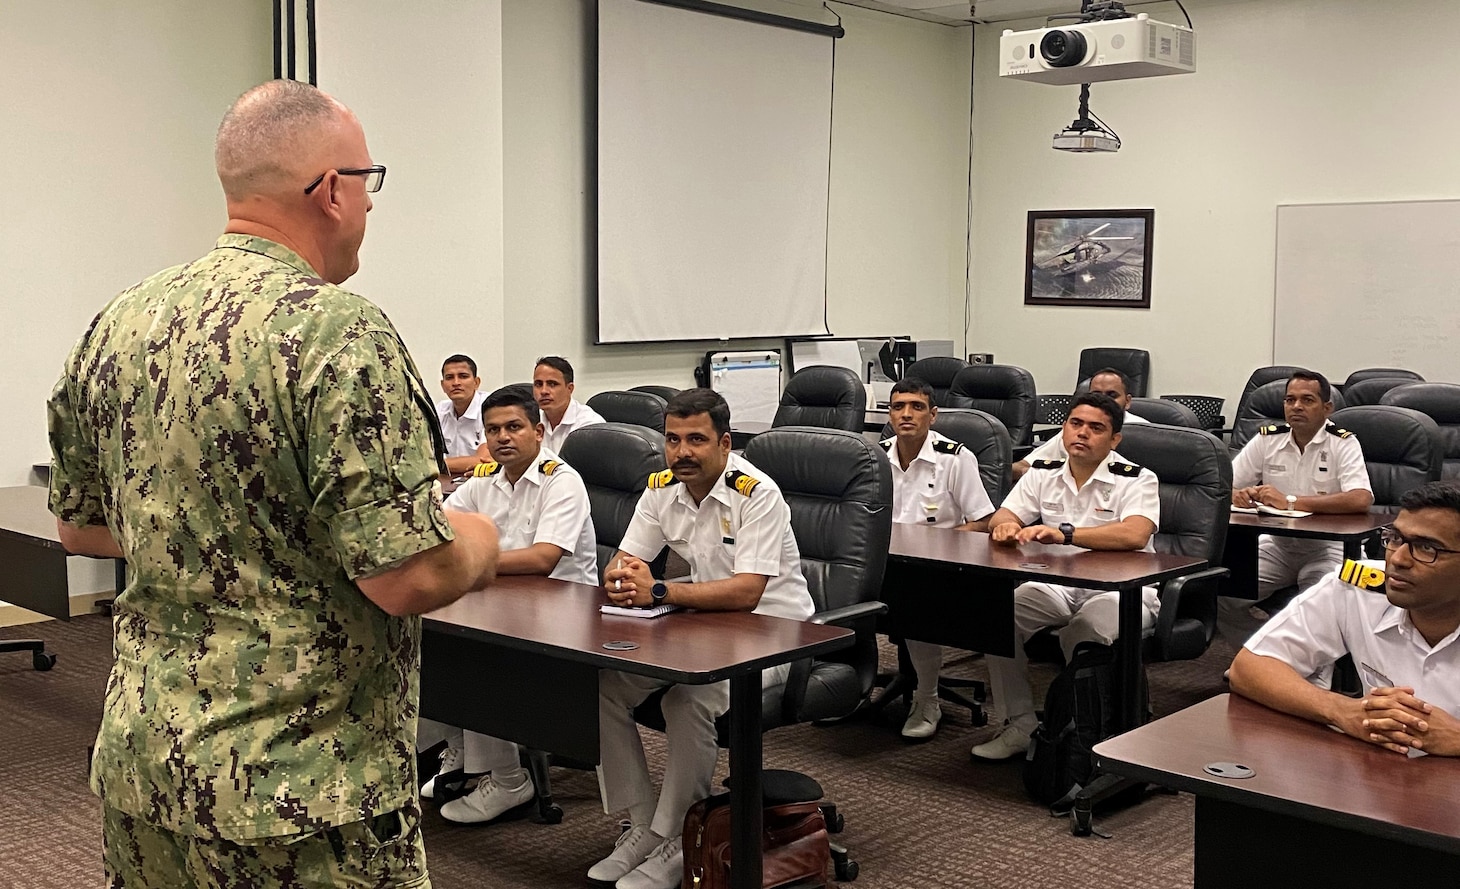 CNATTU North Island welcomes Indian Navy > Naval Education and Training ...